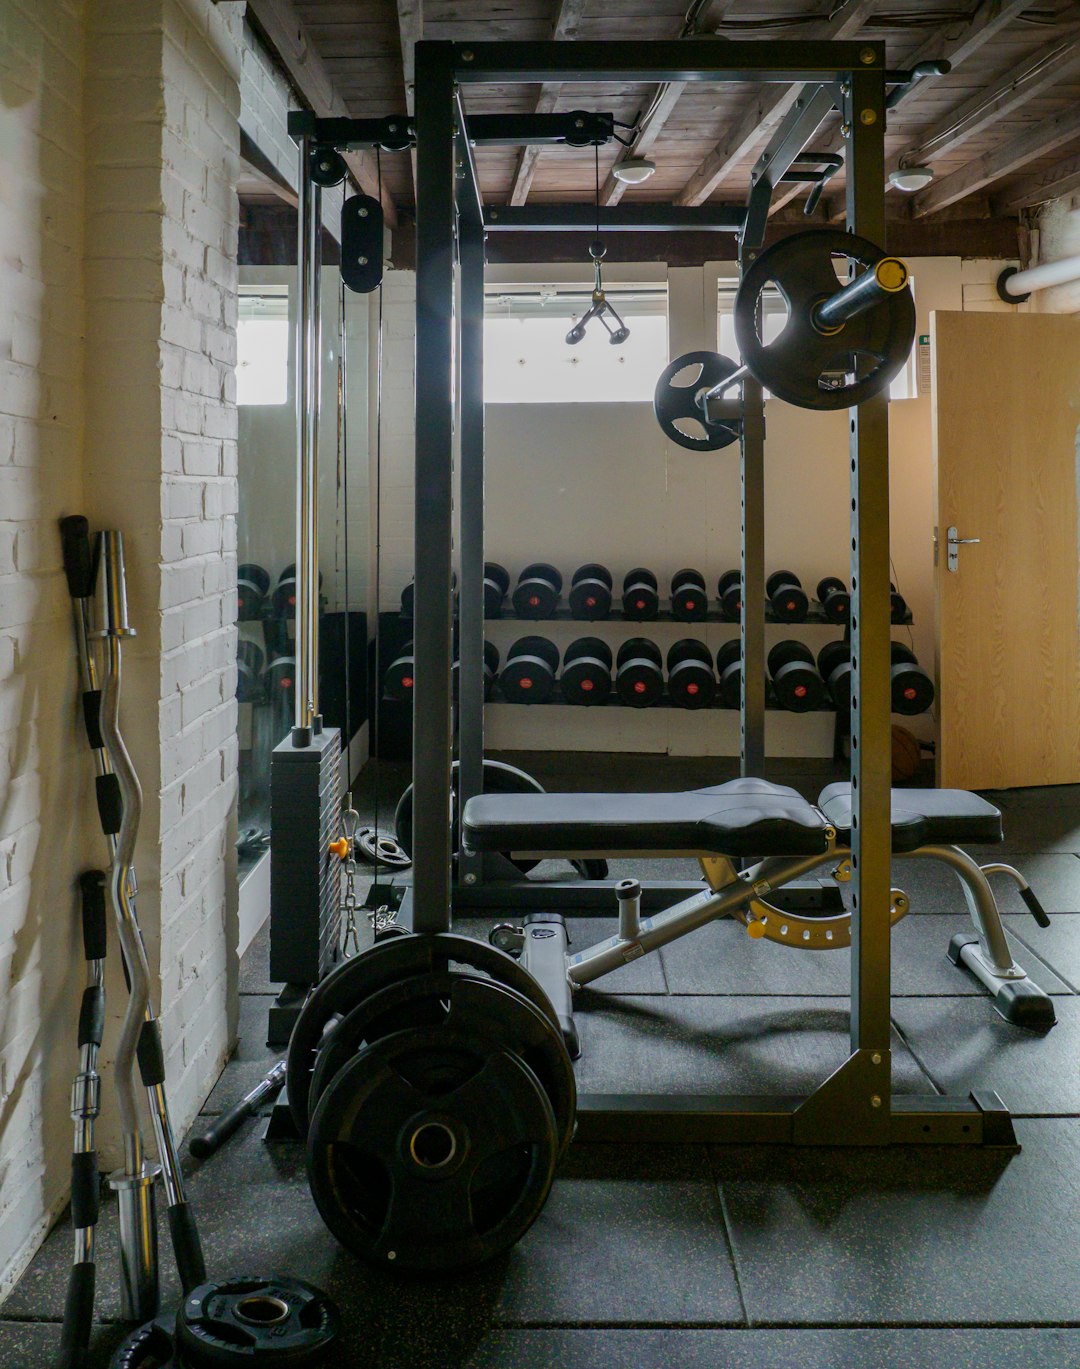 black and brown exercise equipment